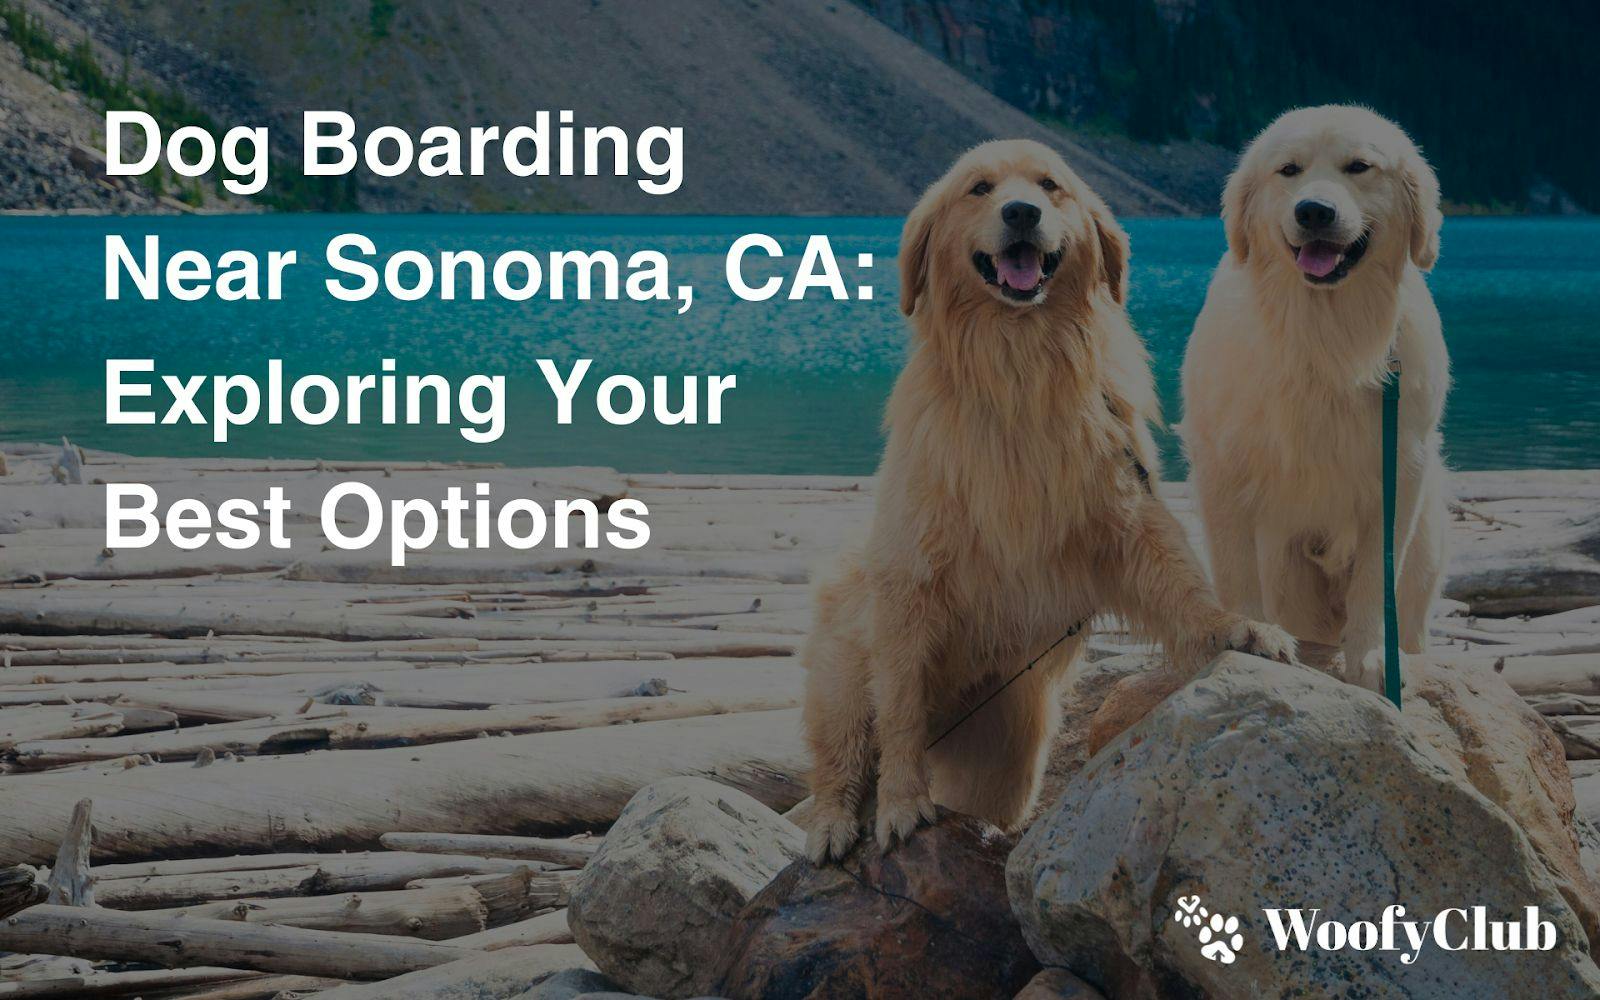 Dog Boarding Near Sonoma, CA: Exploring Your Best Options